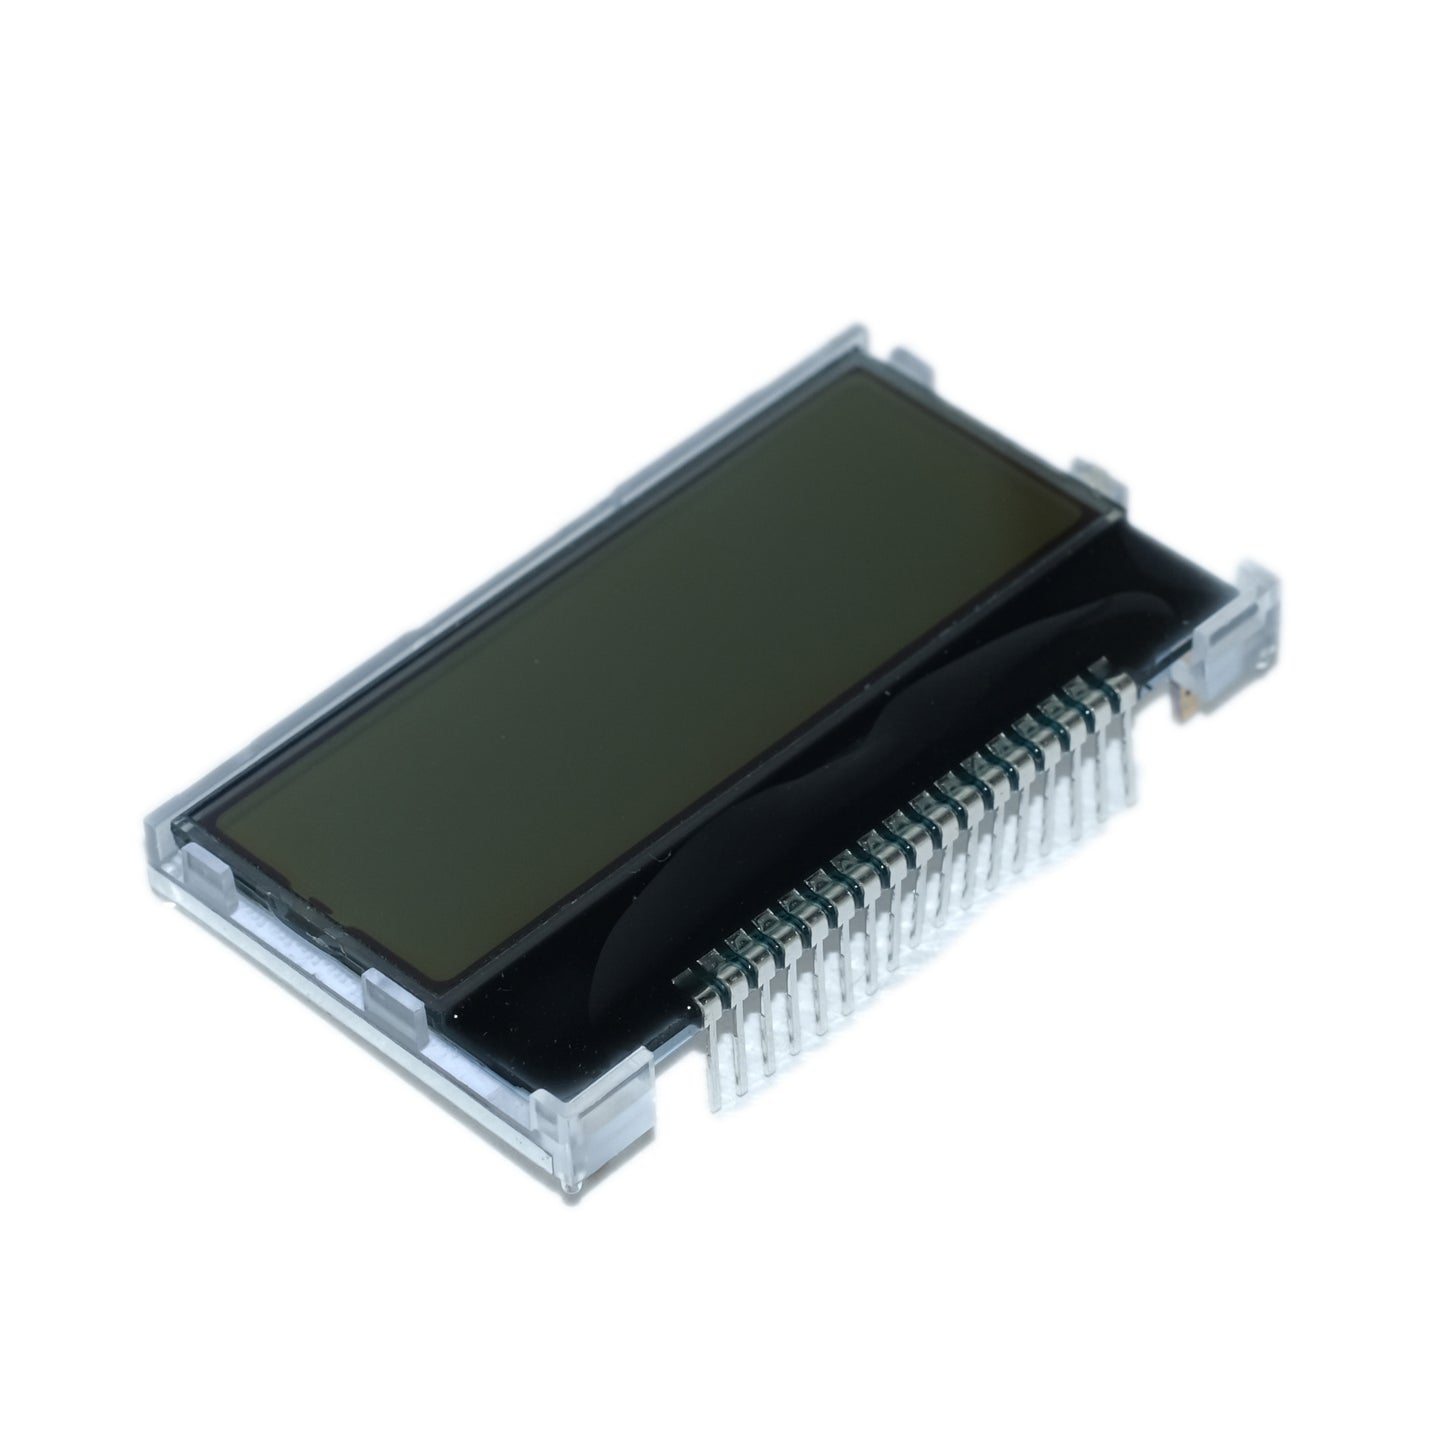 Top View of 128x32 pixels COG (Chip-On-Glass) LCD Graphic Display Module